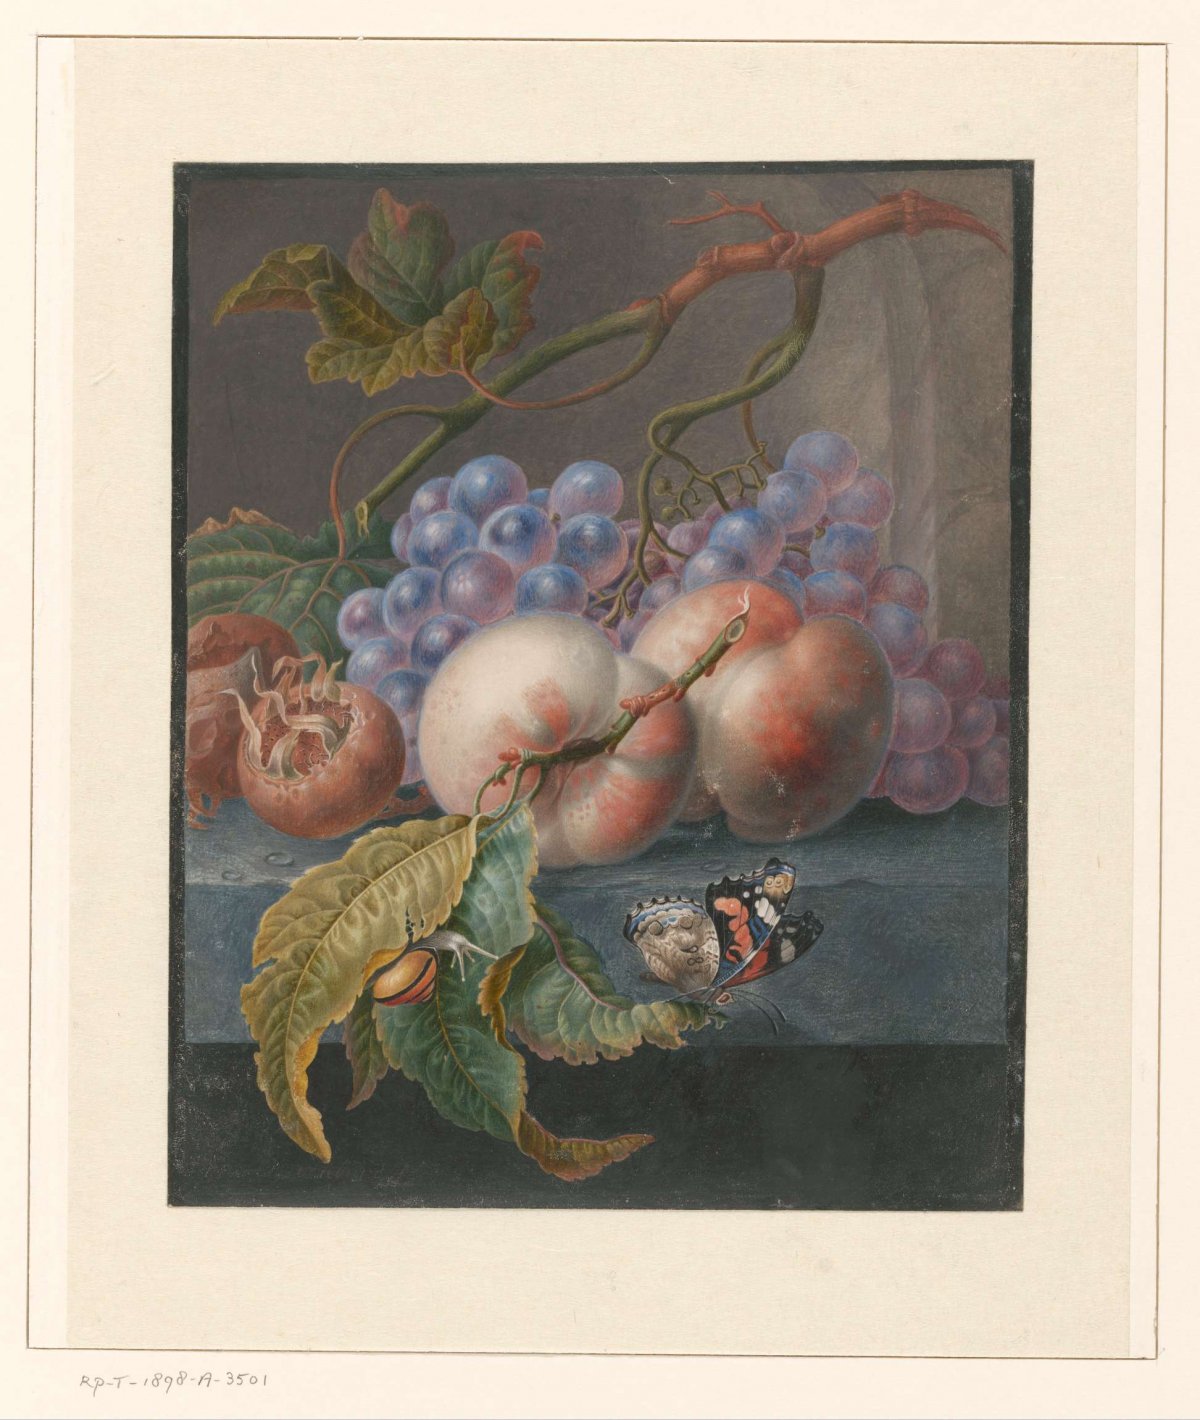 Fruit with a butterfly and a snail, Herman Henstenburgh, 1677 - 1726